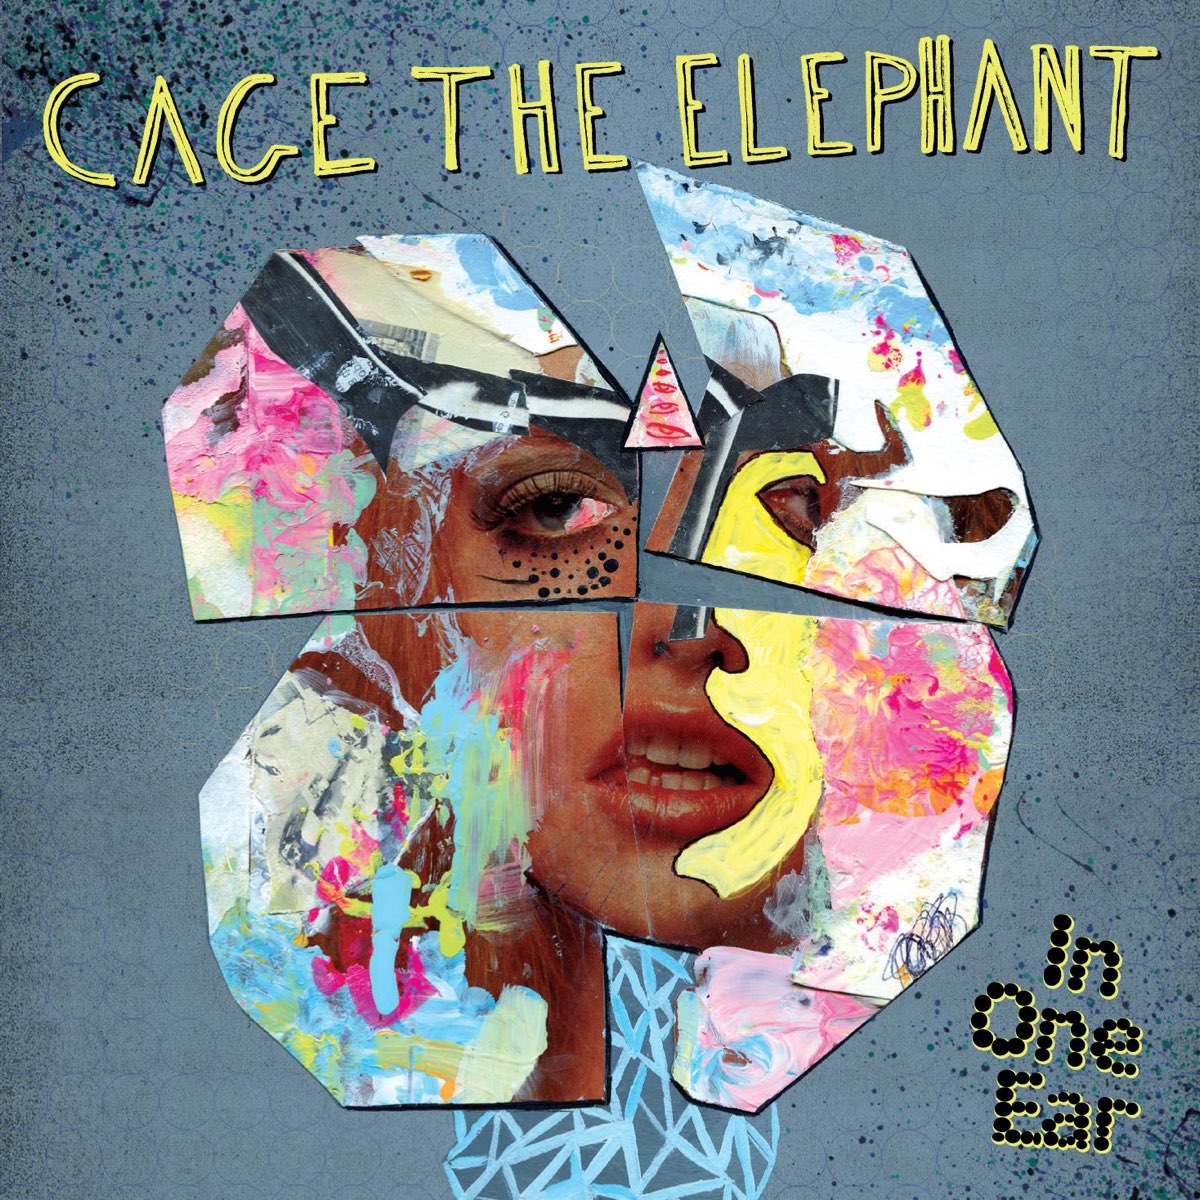 Cage the elephant come a little. Cage the Elephant. Cage the Elephant album. Cage the Elephant обложка. Cage the Elephant обложки альбомов.